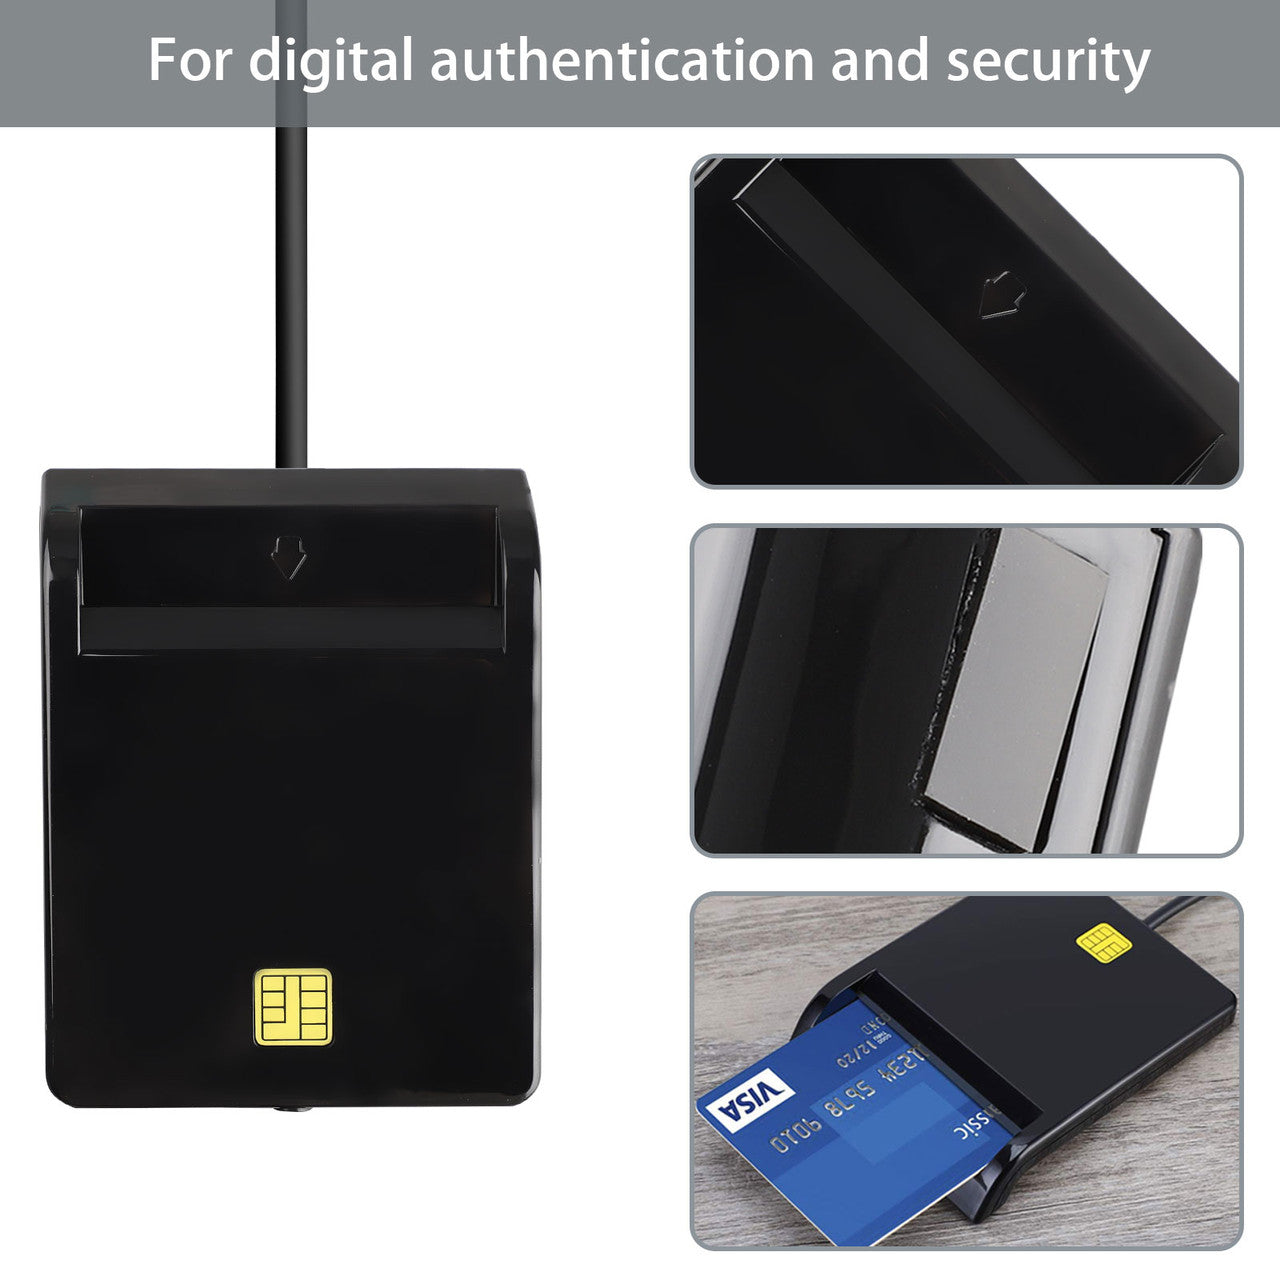 Smart Card Reader DOD Military USB Common Access CAC, Compatible with Windows, Mac OS 10.6-10.10 and Linux